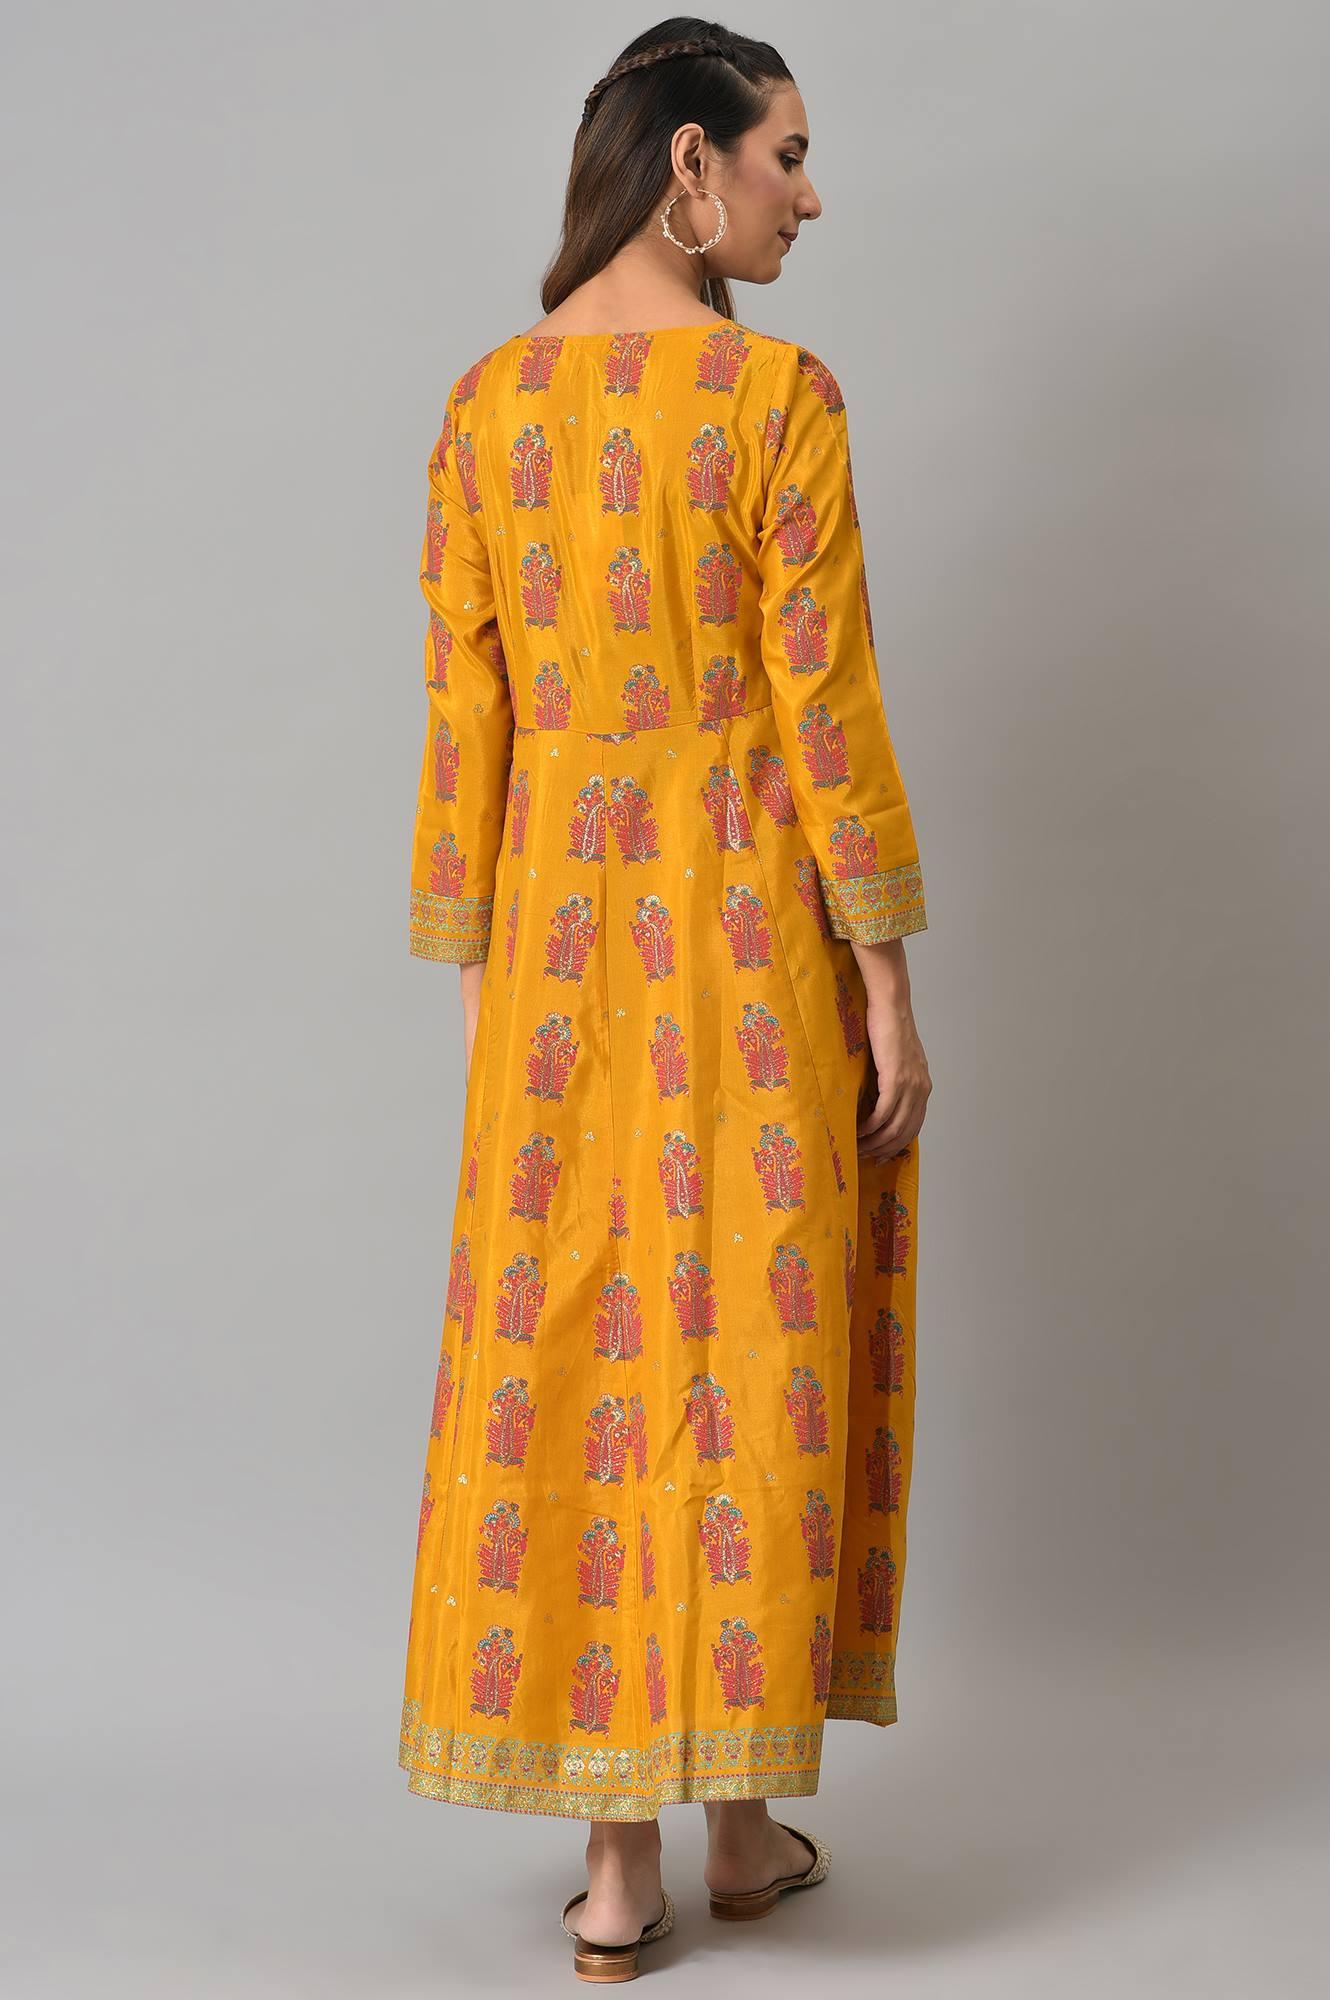 Mustard Paisley Printed Embroidered Ethnic Dress - wforwoman